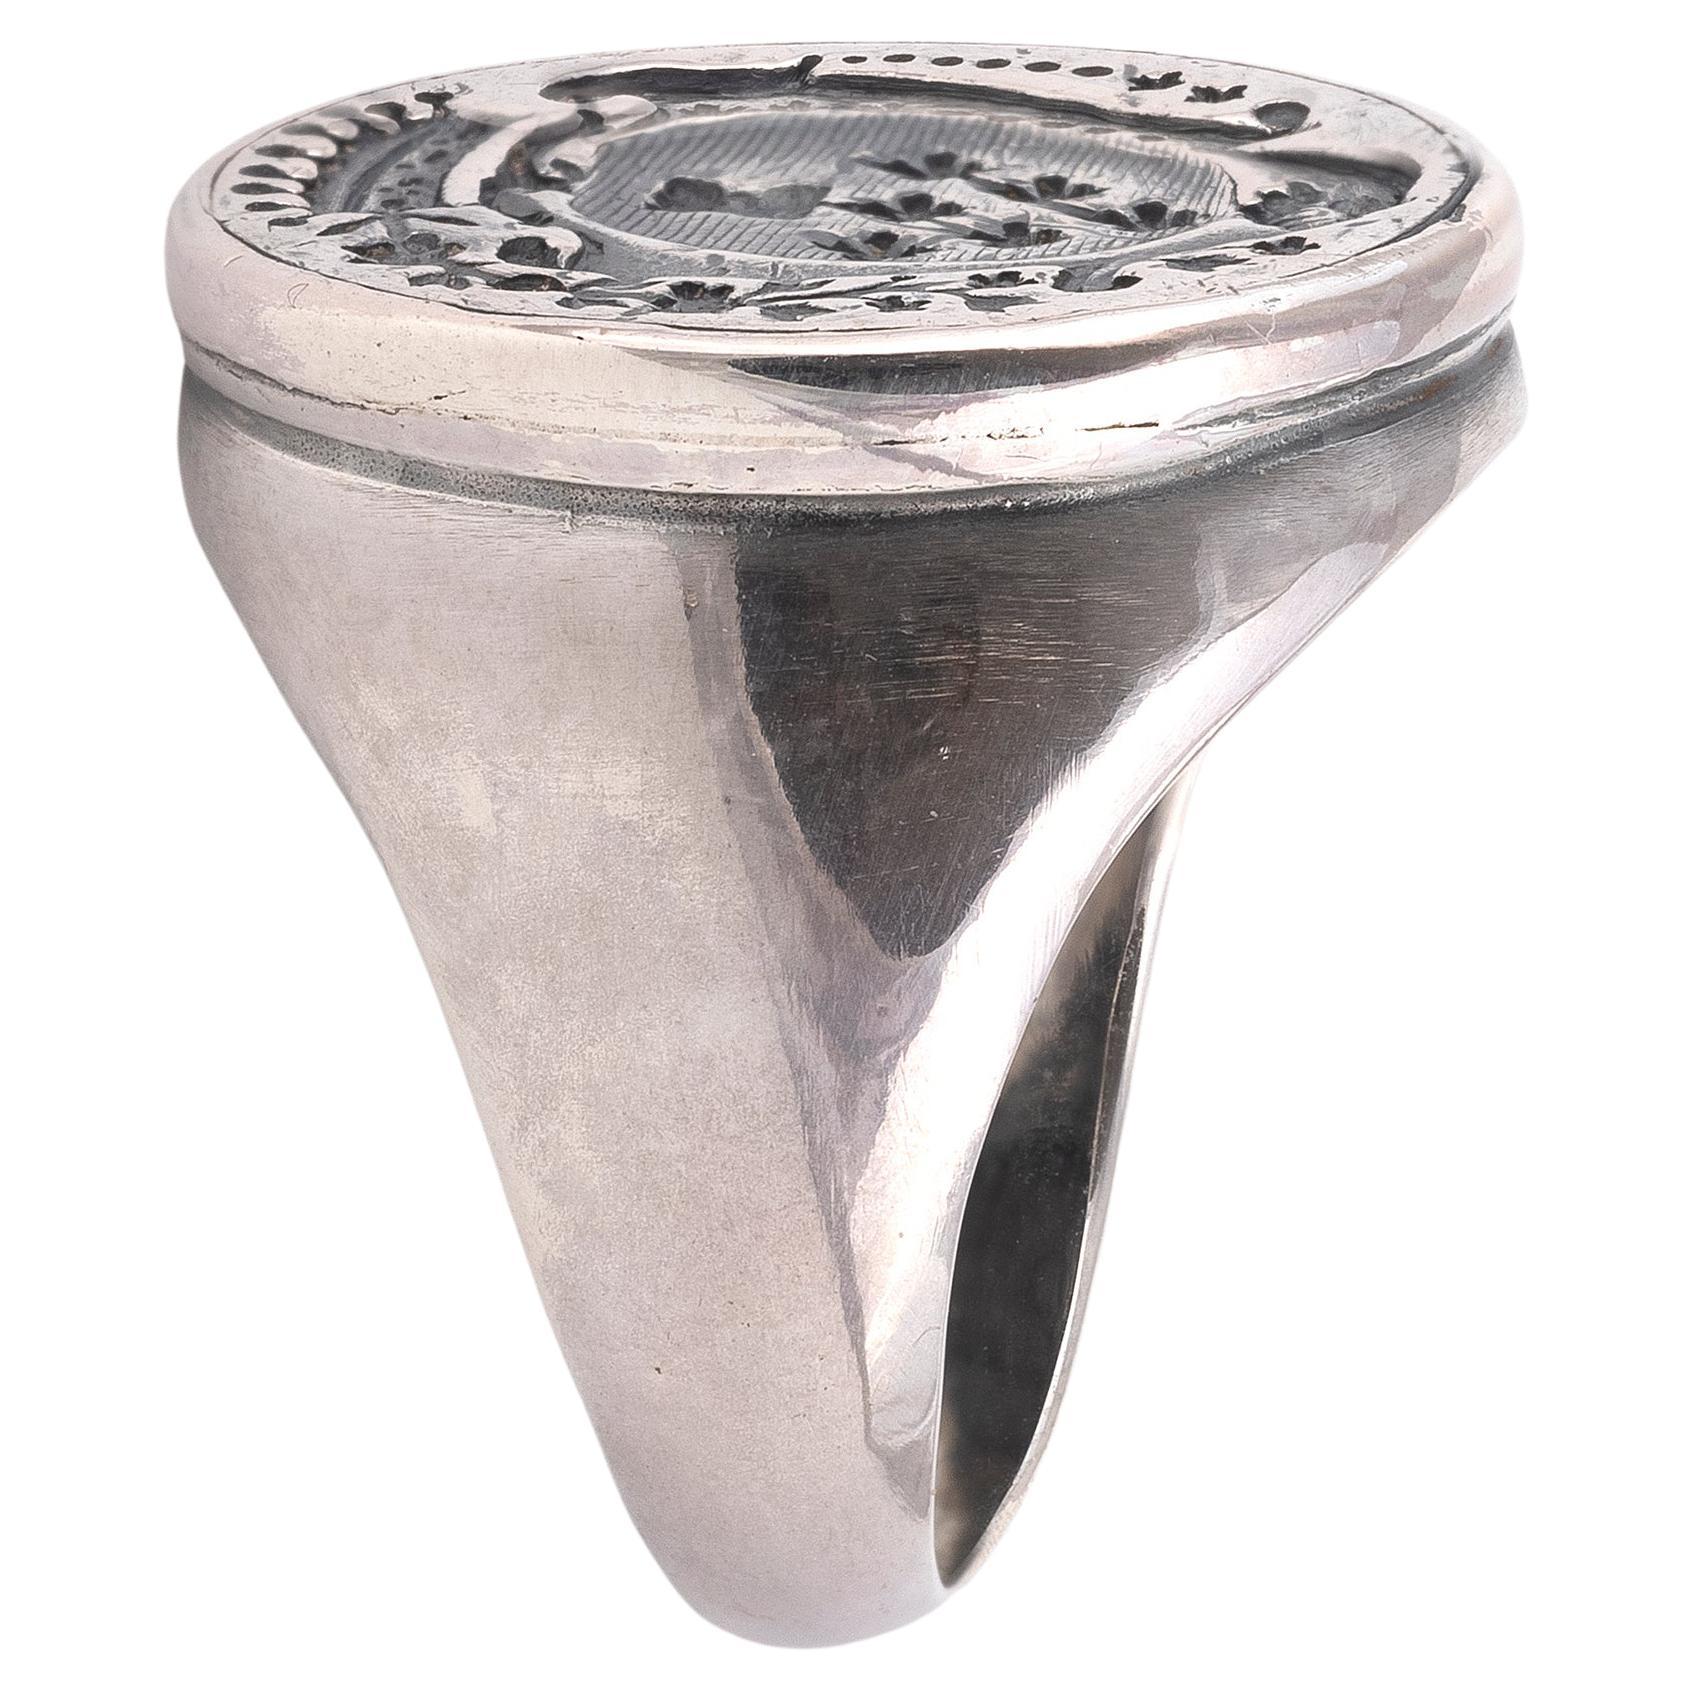 The ring has a great face that was probably at one time an official seal with extremely intricate detail that flows from top to bottom.The overall approximate face dimensions are 24mm tall by 20mm wide. Ring is approximately a size 9 on my ring